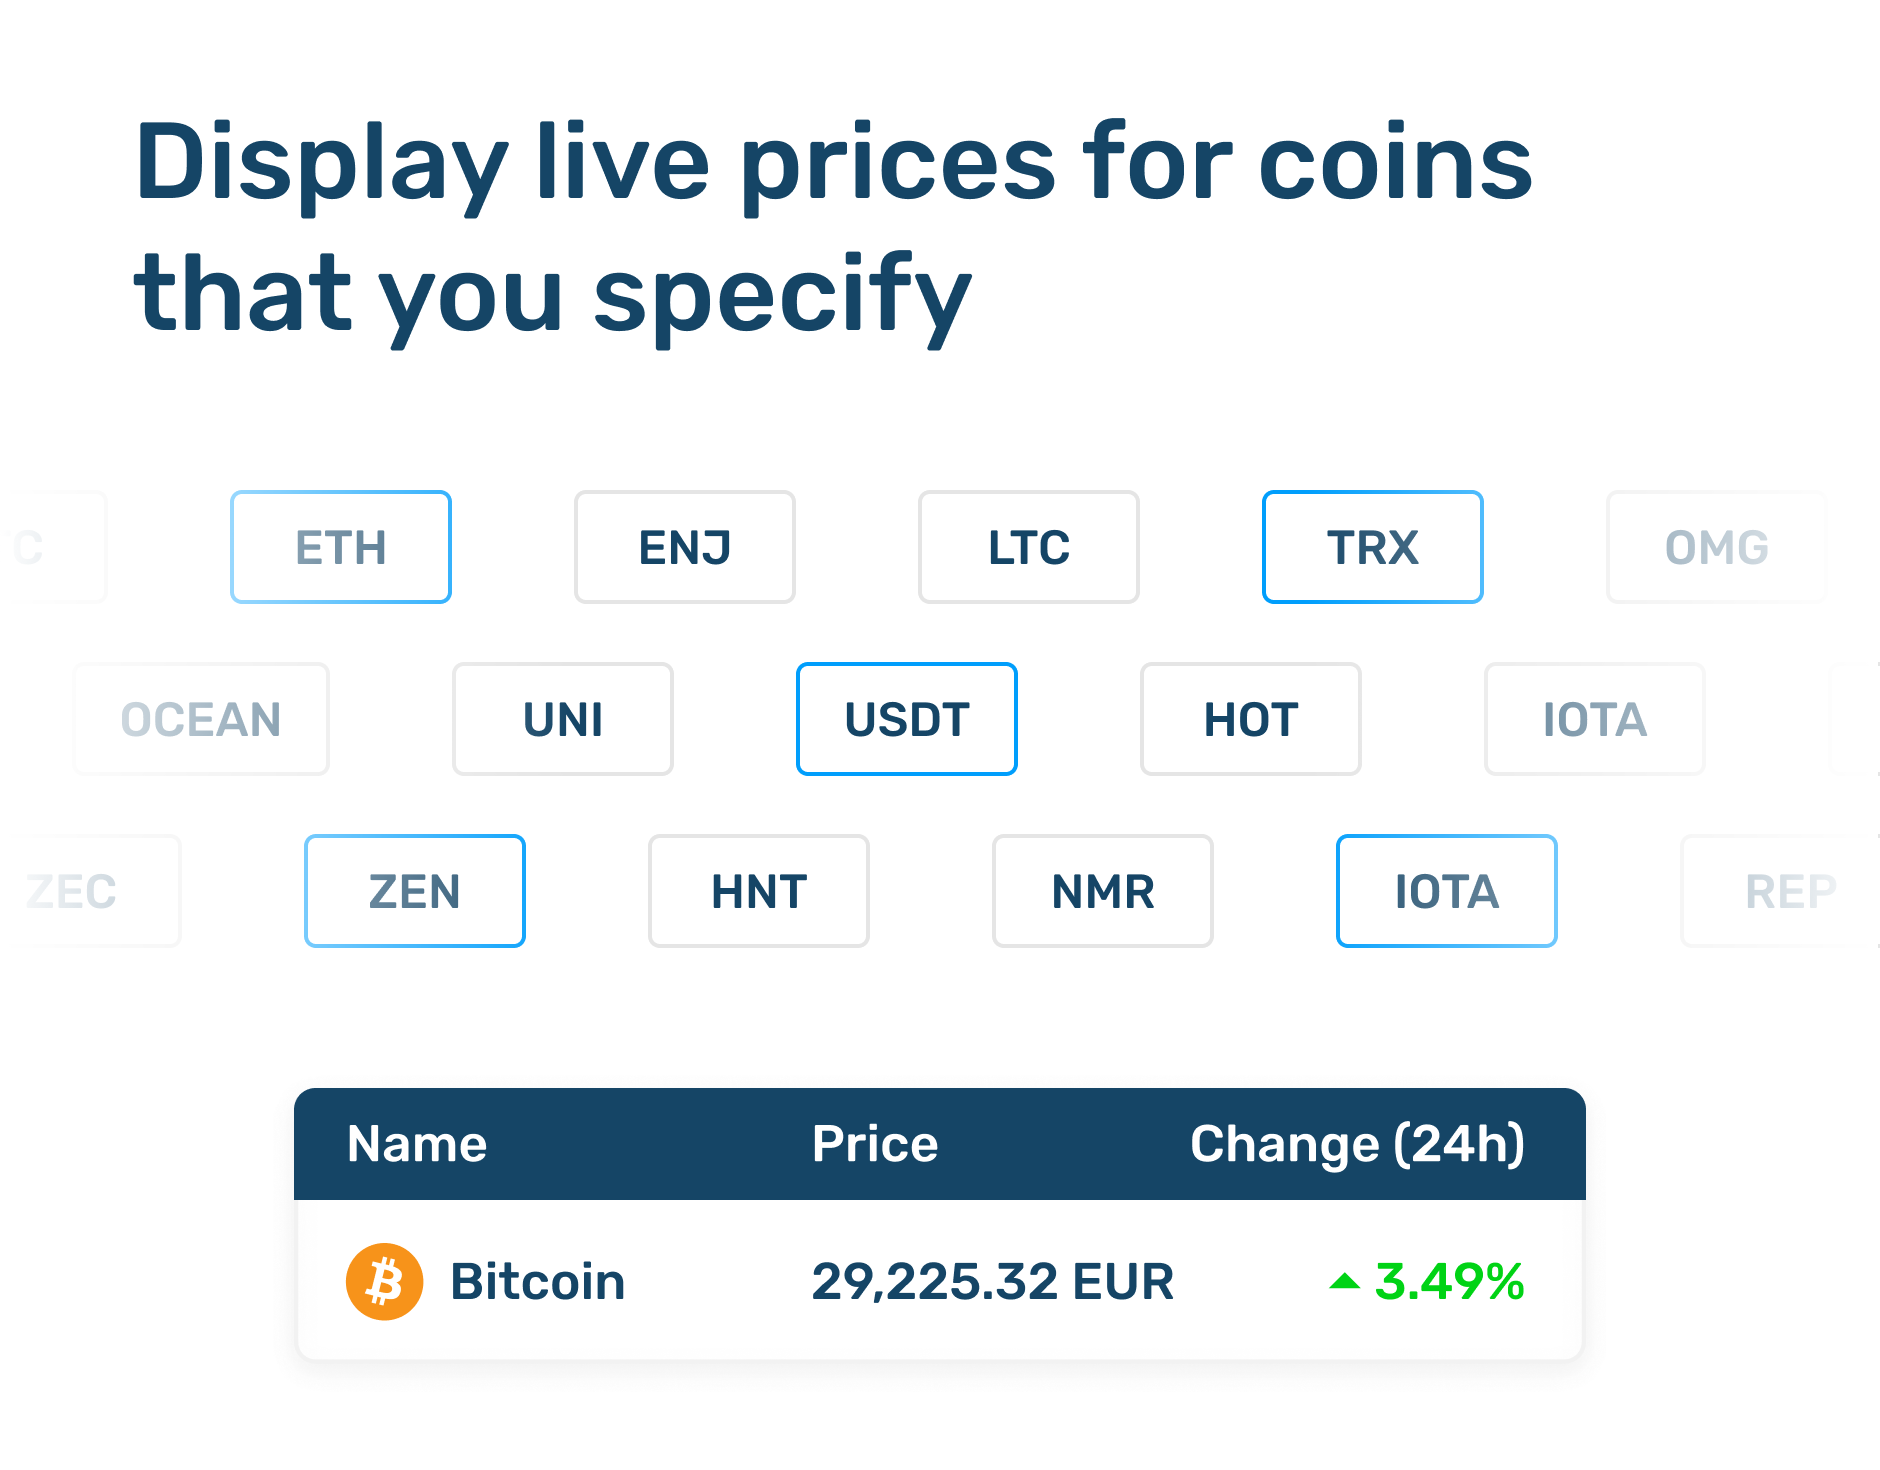 Display live prices for coins that you specify